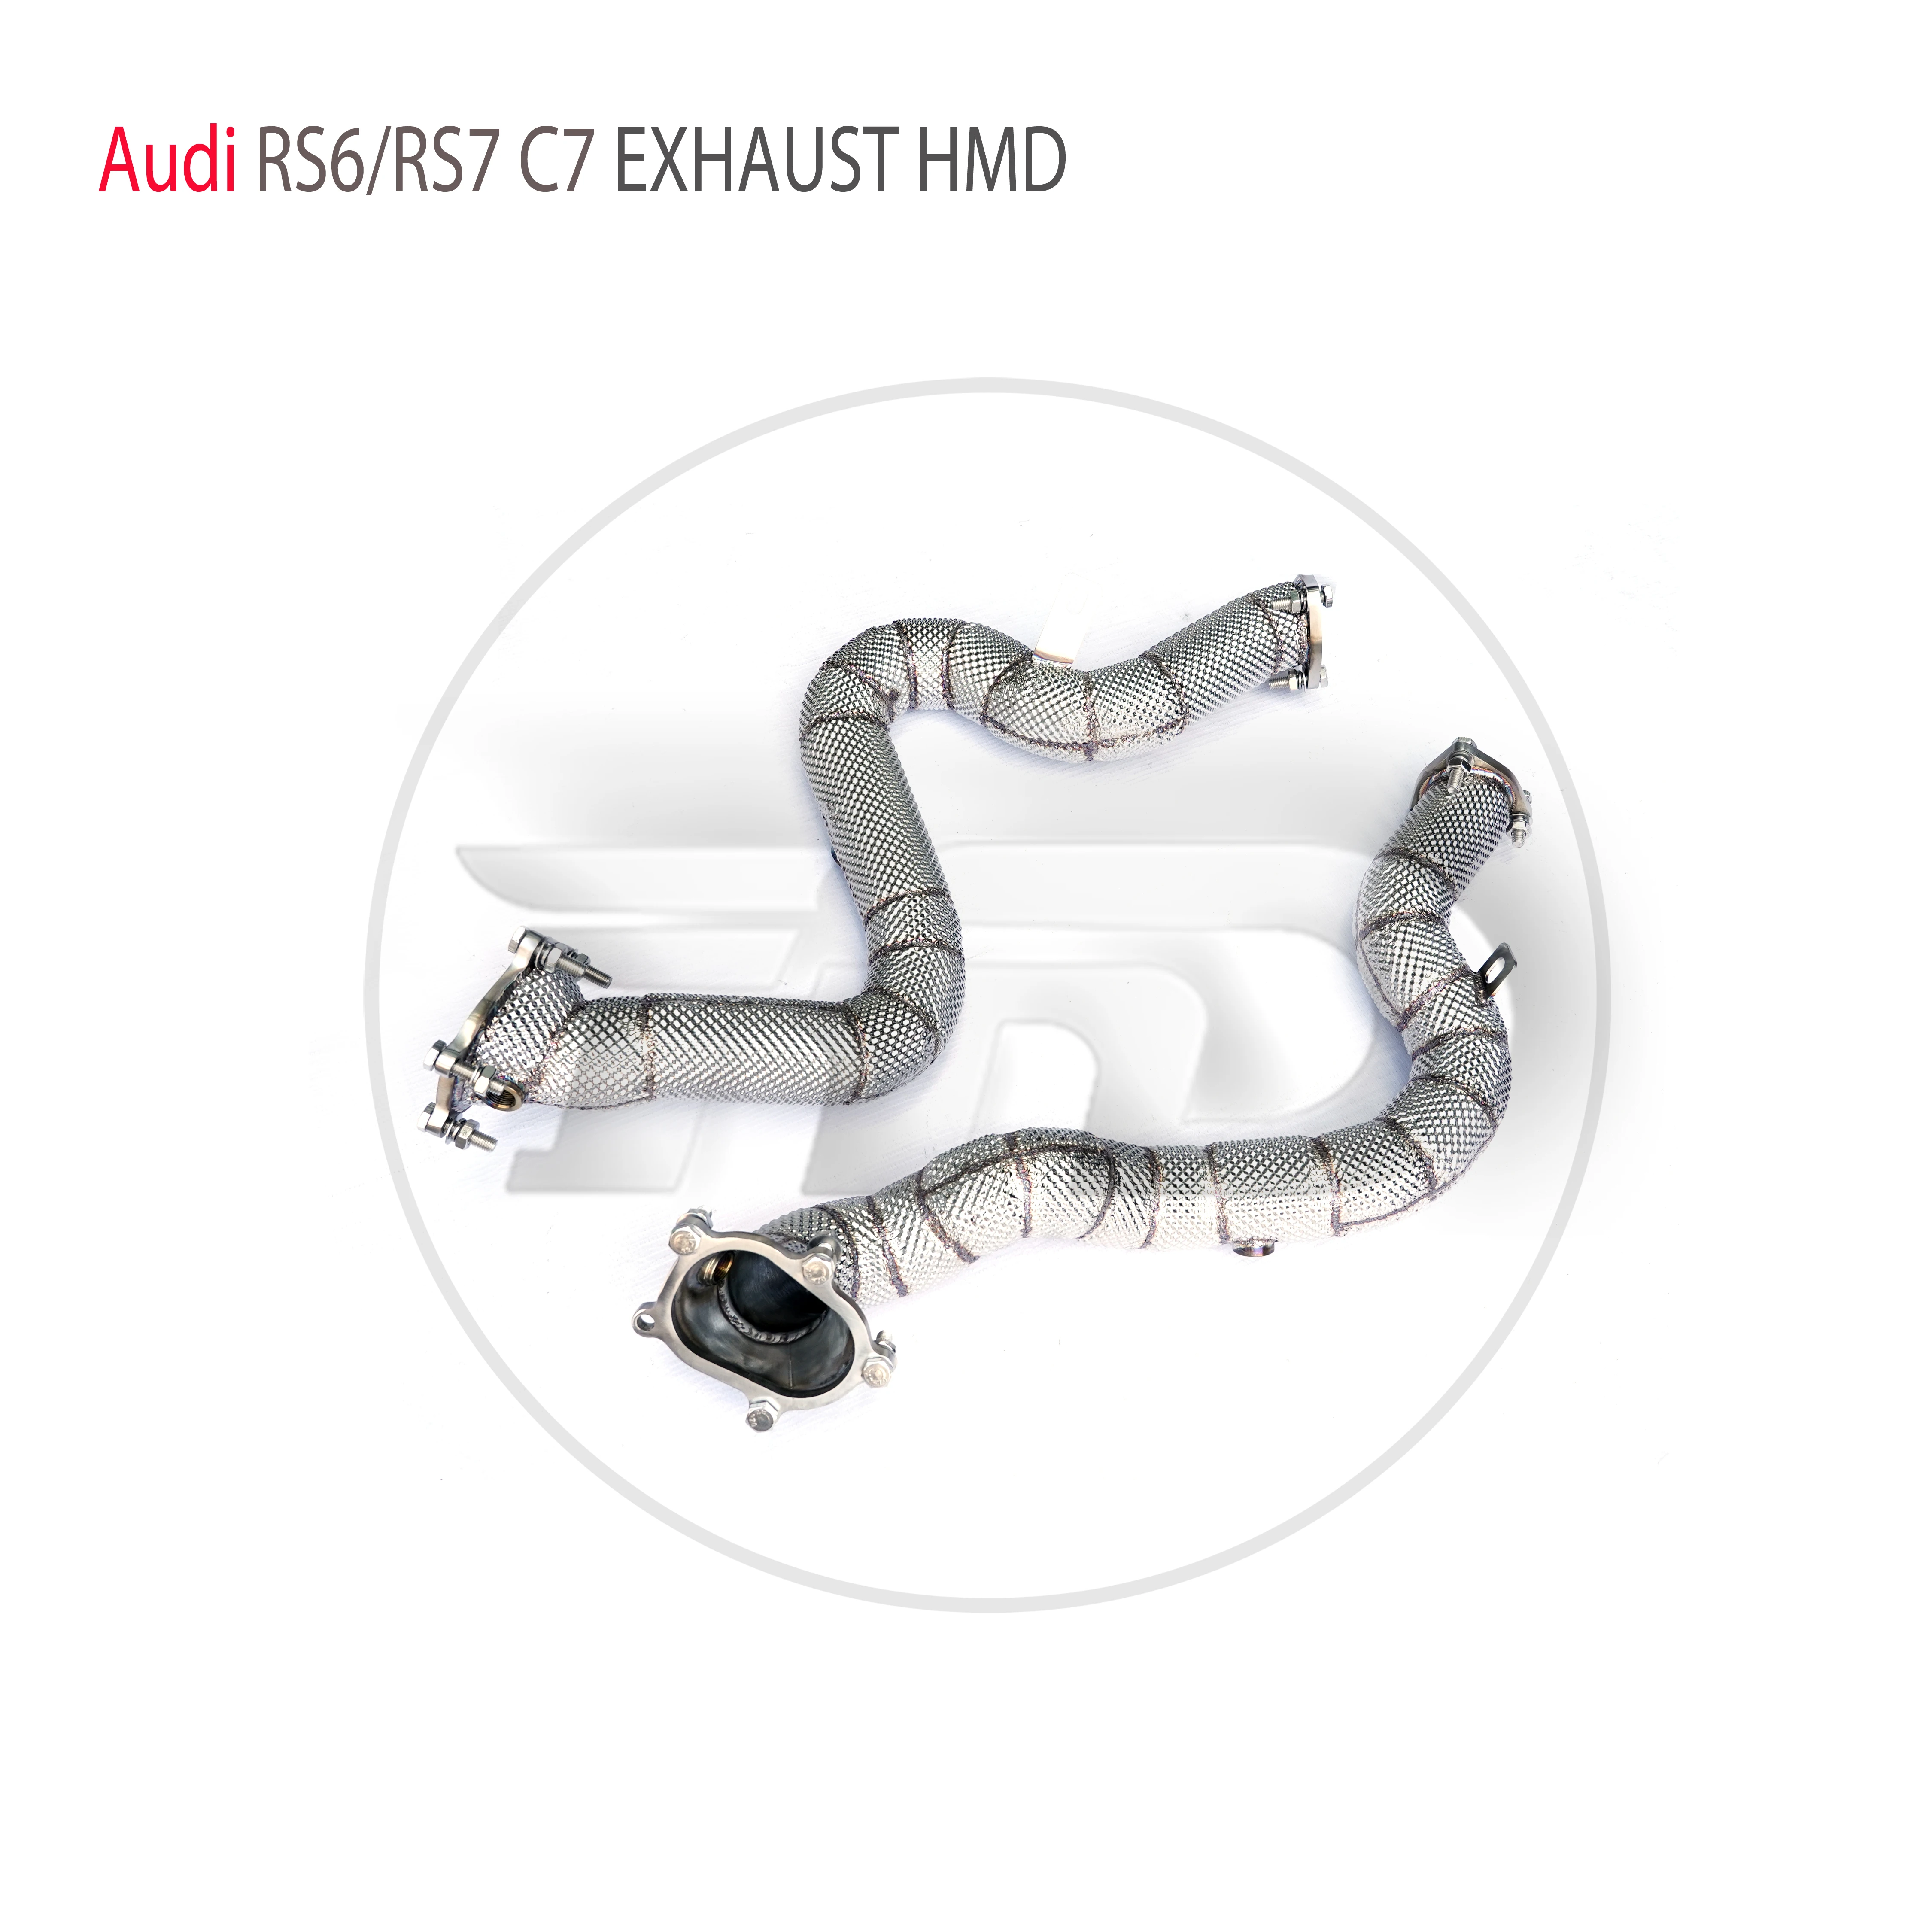 

HMD Exhaust System High Flow Performance Downpipe for Audi RS6 RS7 C7 2013-2020 Without Catalytic Converter Header